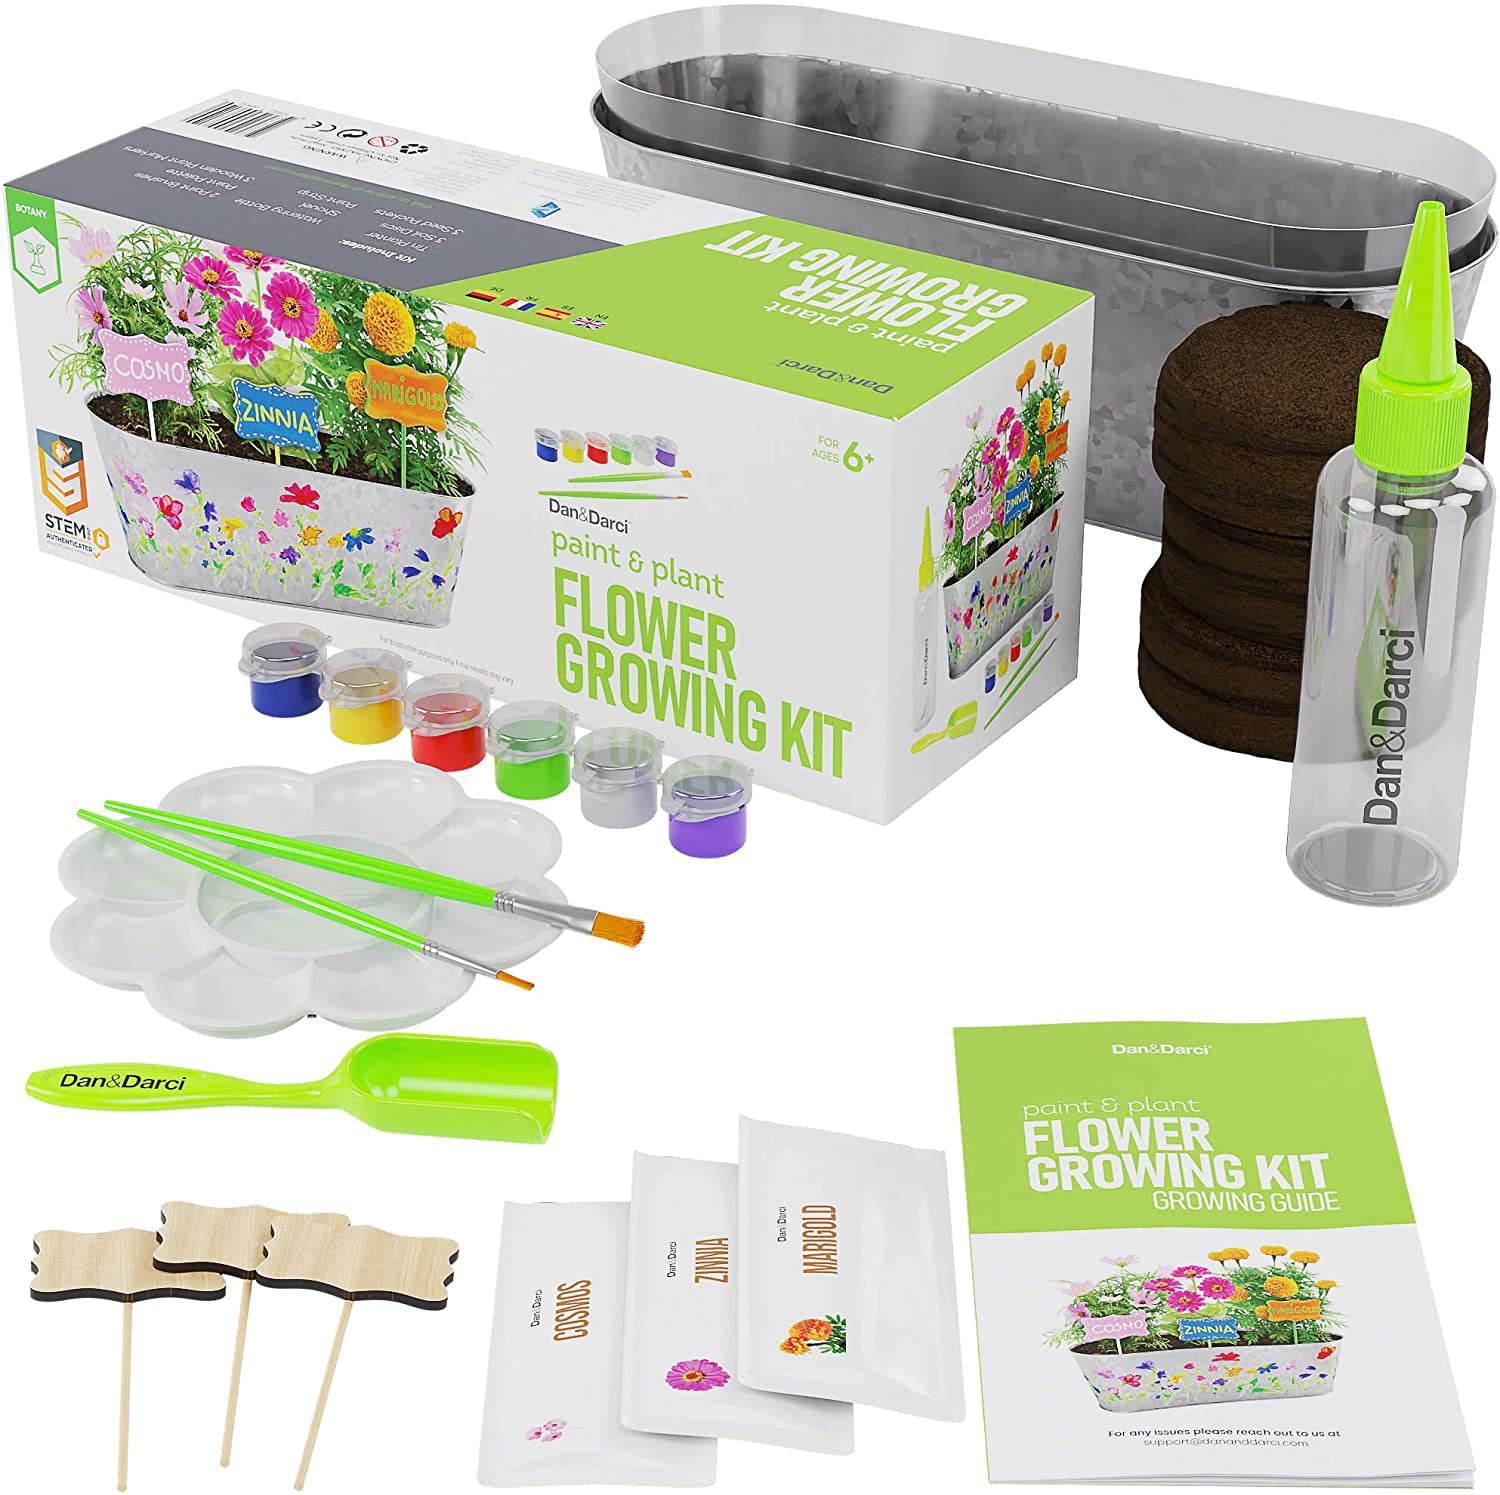 Flower Planting Growing Kit & Paint Arts Crafts Set,Kids Gardening Science Gifts for Girls and Boys Ages 4 5 6 7 8 9 10 11 STEM Arts & Crafts Project Activity,Grow Your Own Different Flowers 